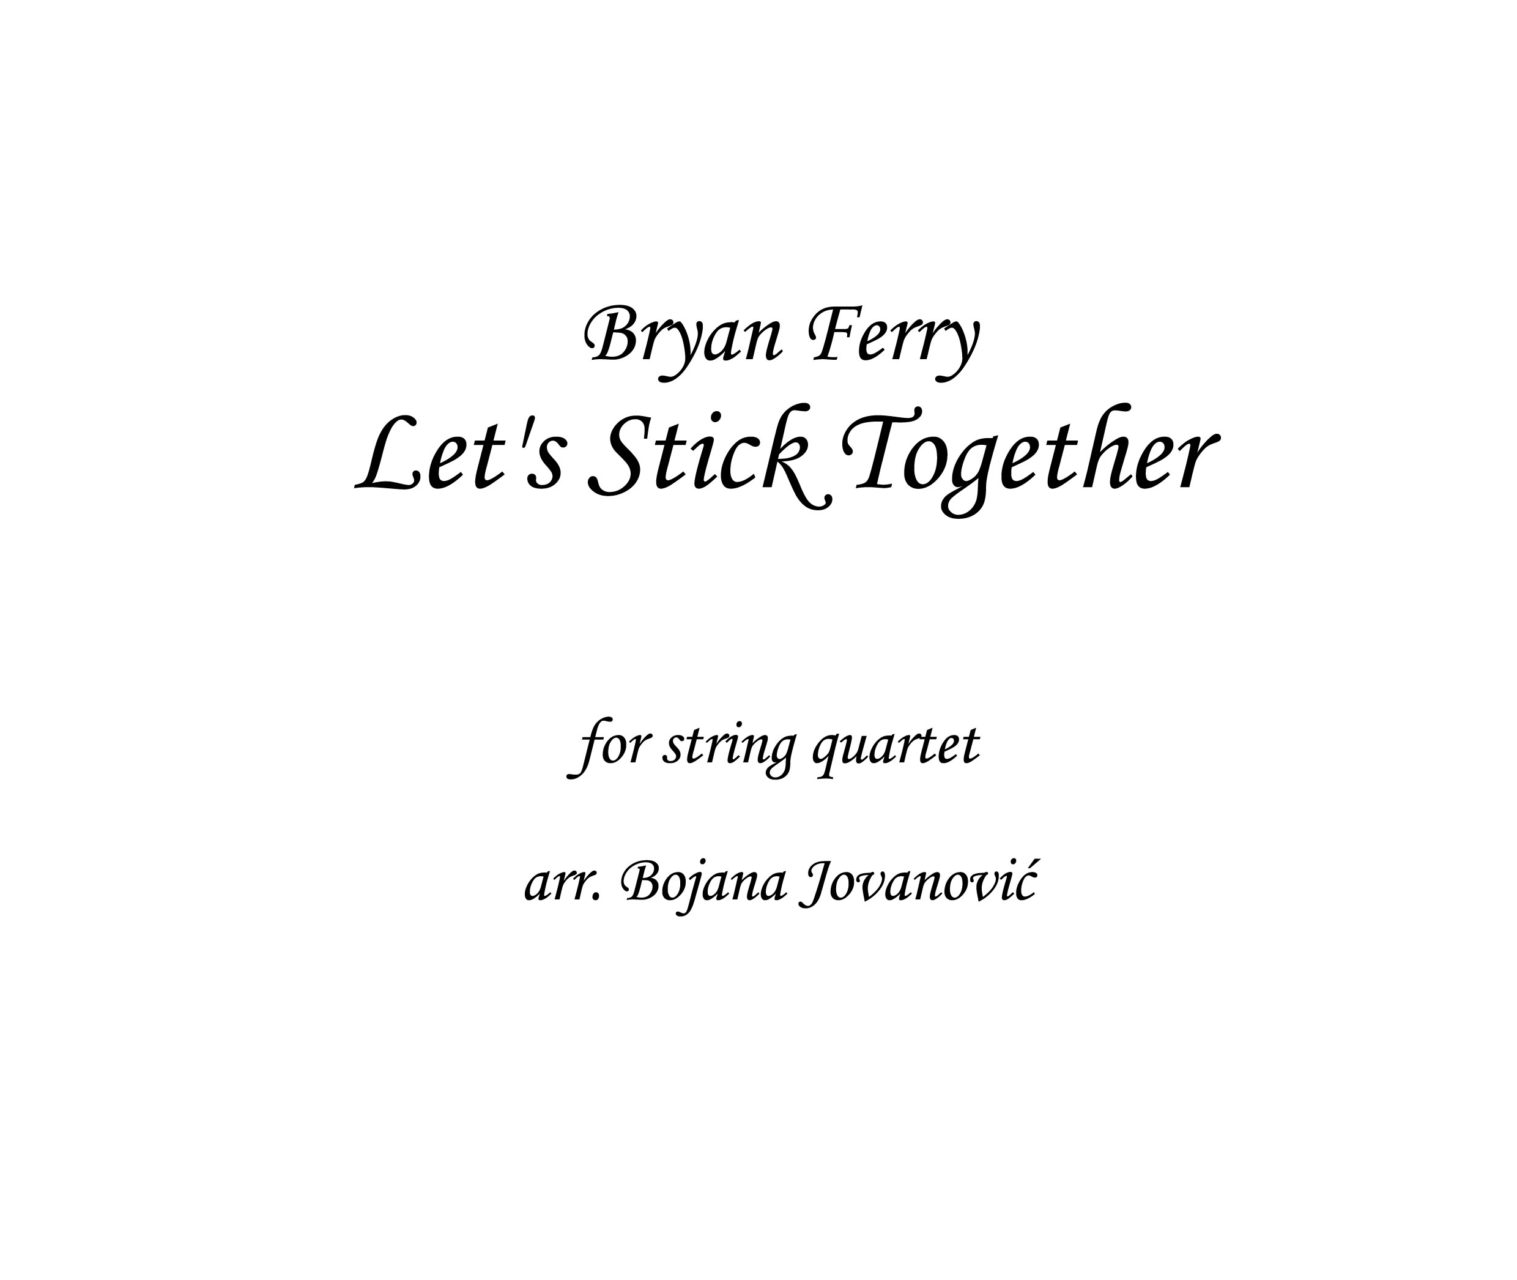 Let’s stick together (Bryan Ferry)